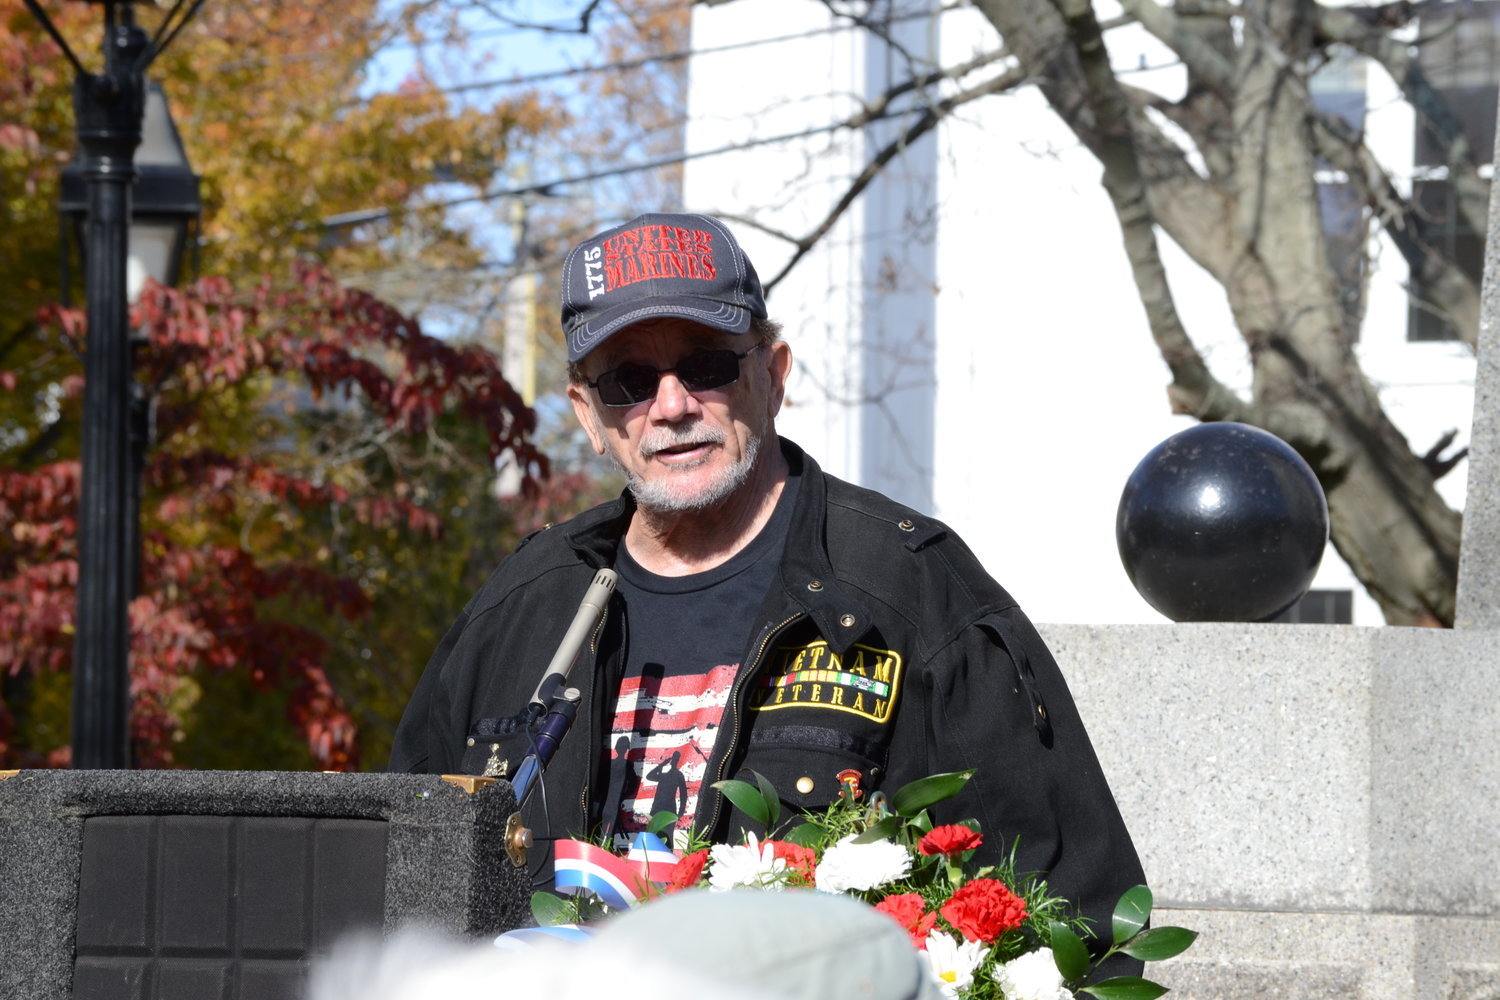 Dave McCarthy, veteran and chairman of the Warren Honor Roll Committee, will provide opening remarks for events throughout the two-day Memorial Day remembrance event schedule.